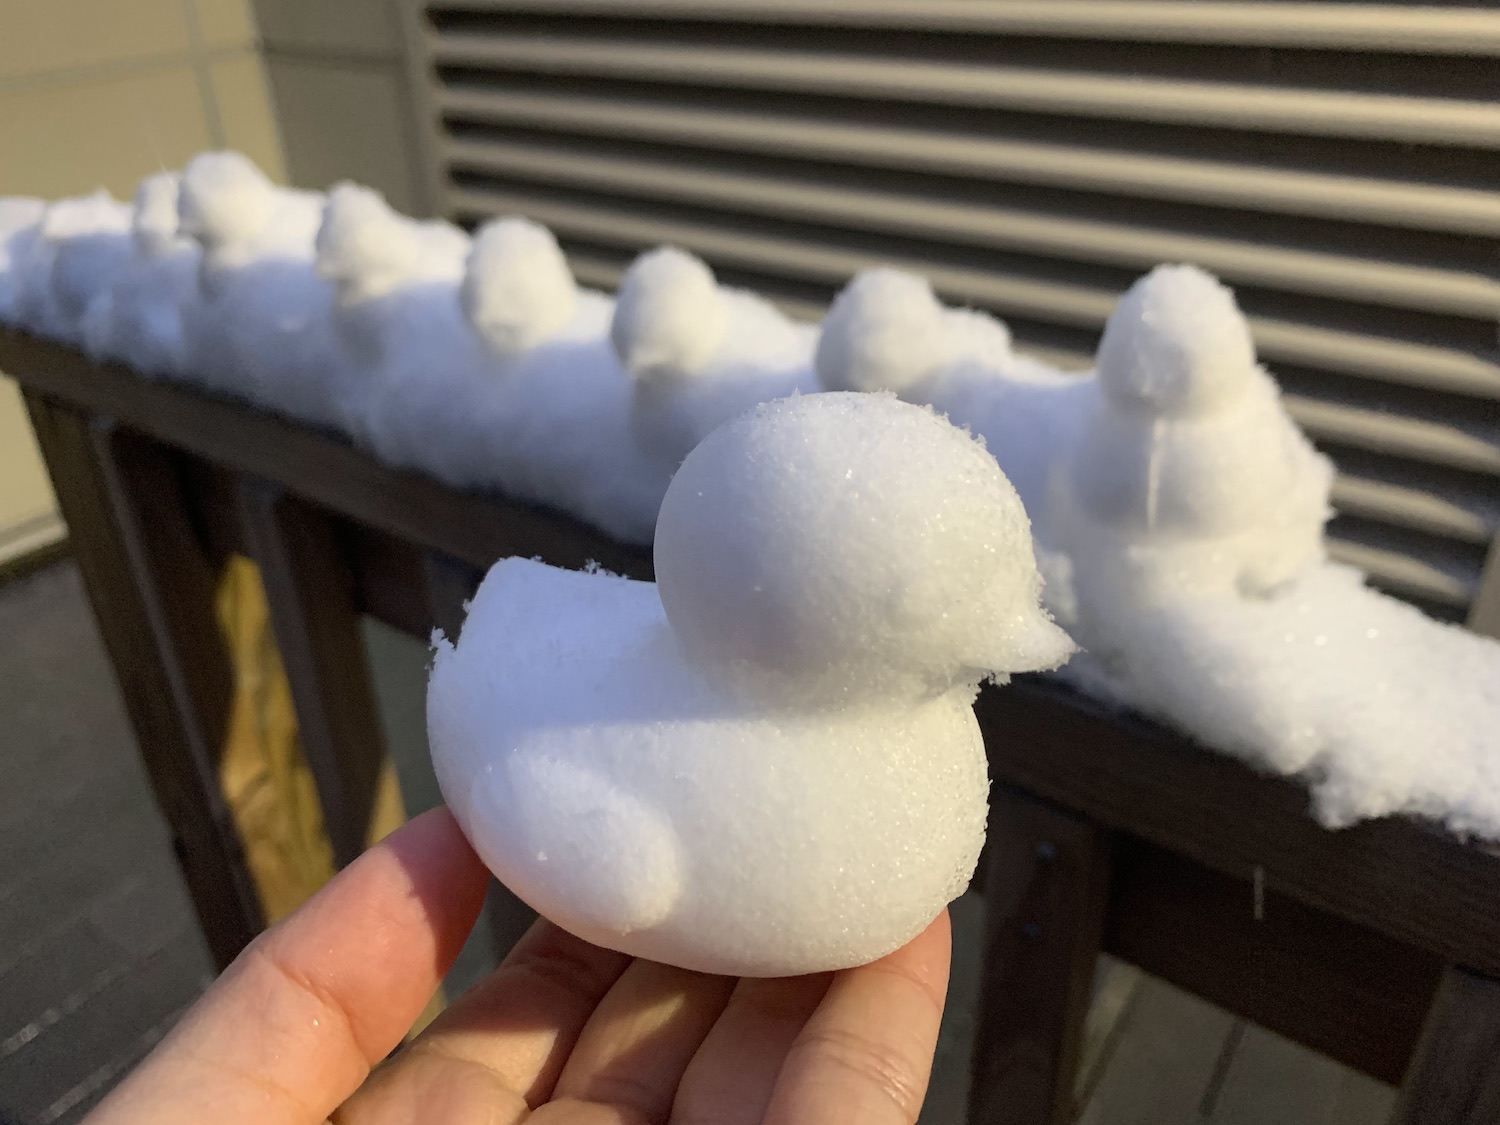 A lineup of snowducks.